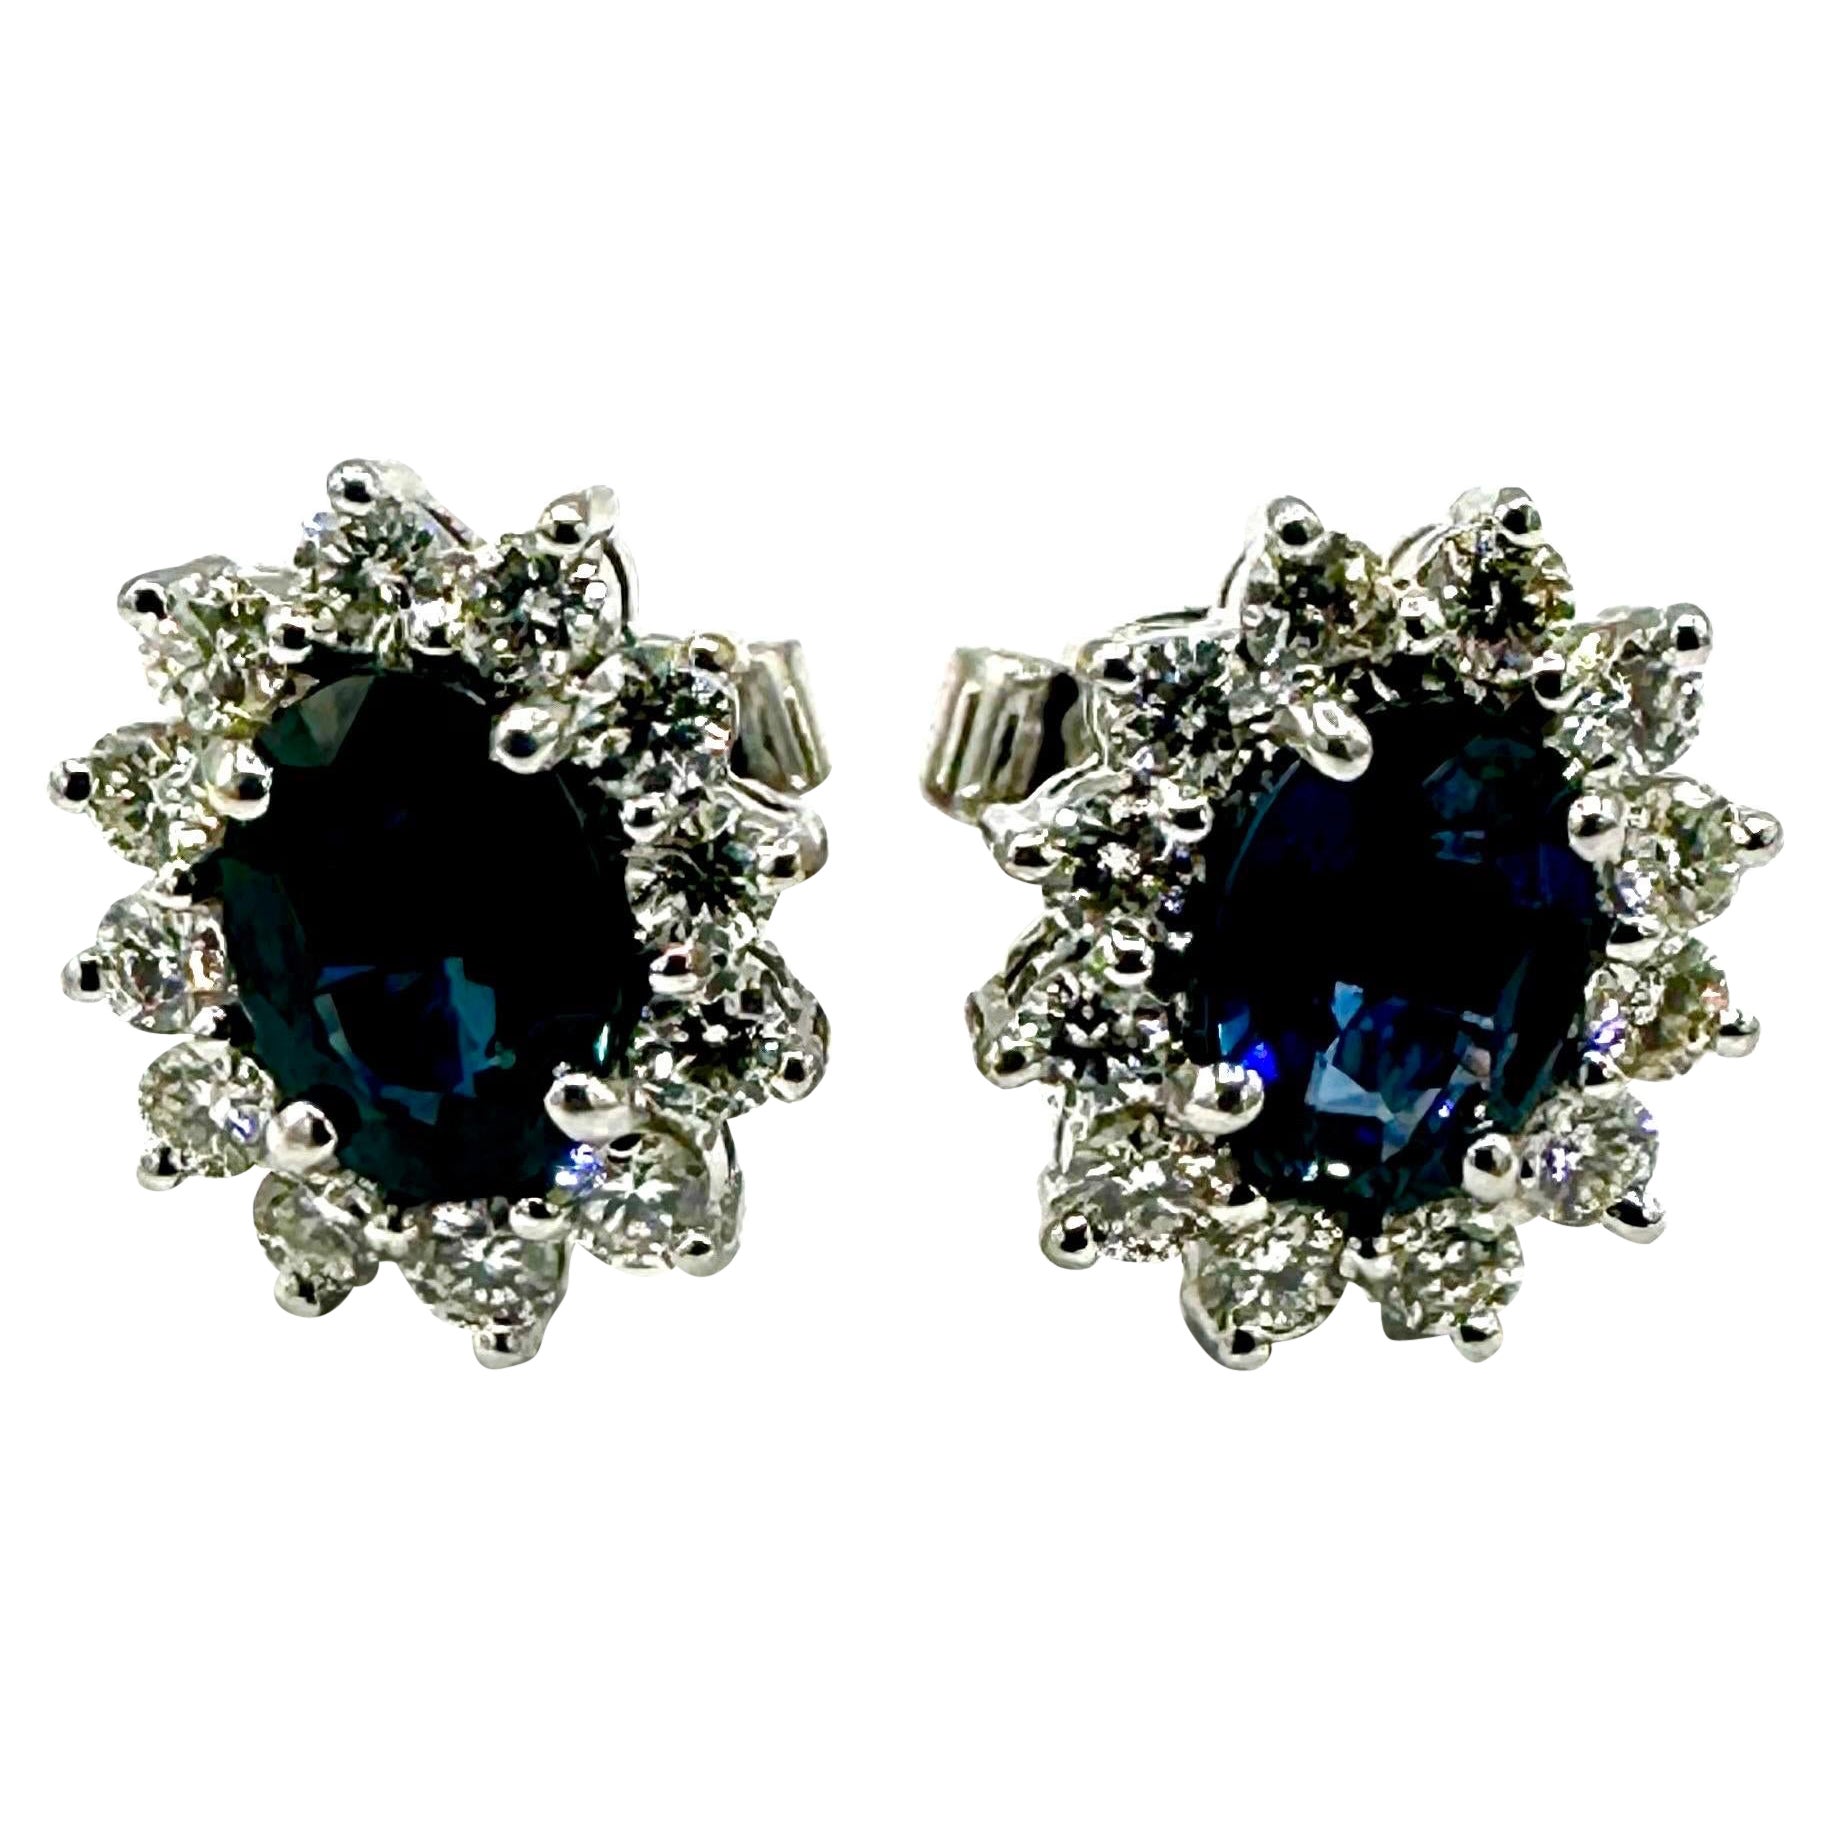 1.26 Carat Oval Sapphire and Round Brilliant Diamond 18k White Gold Earrings